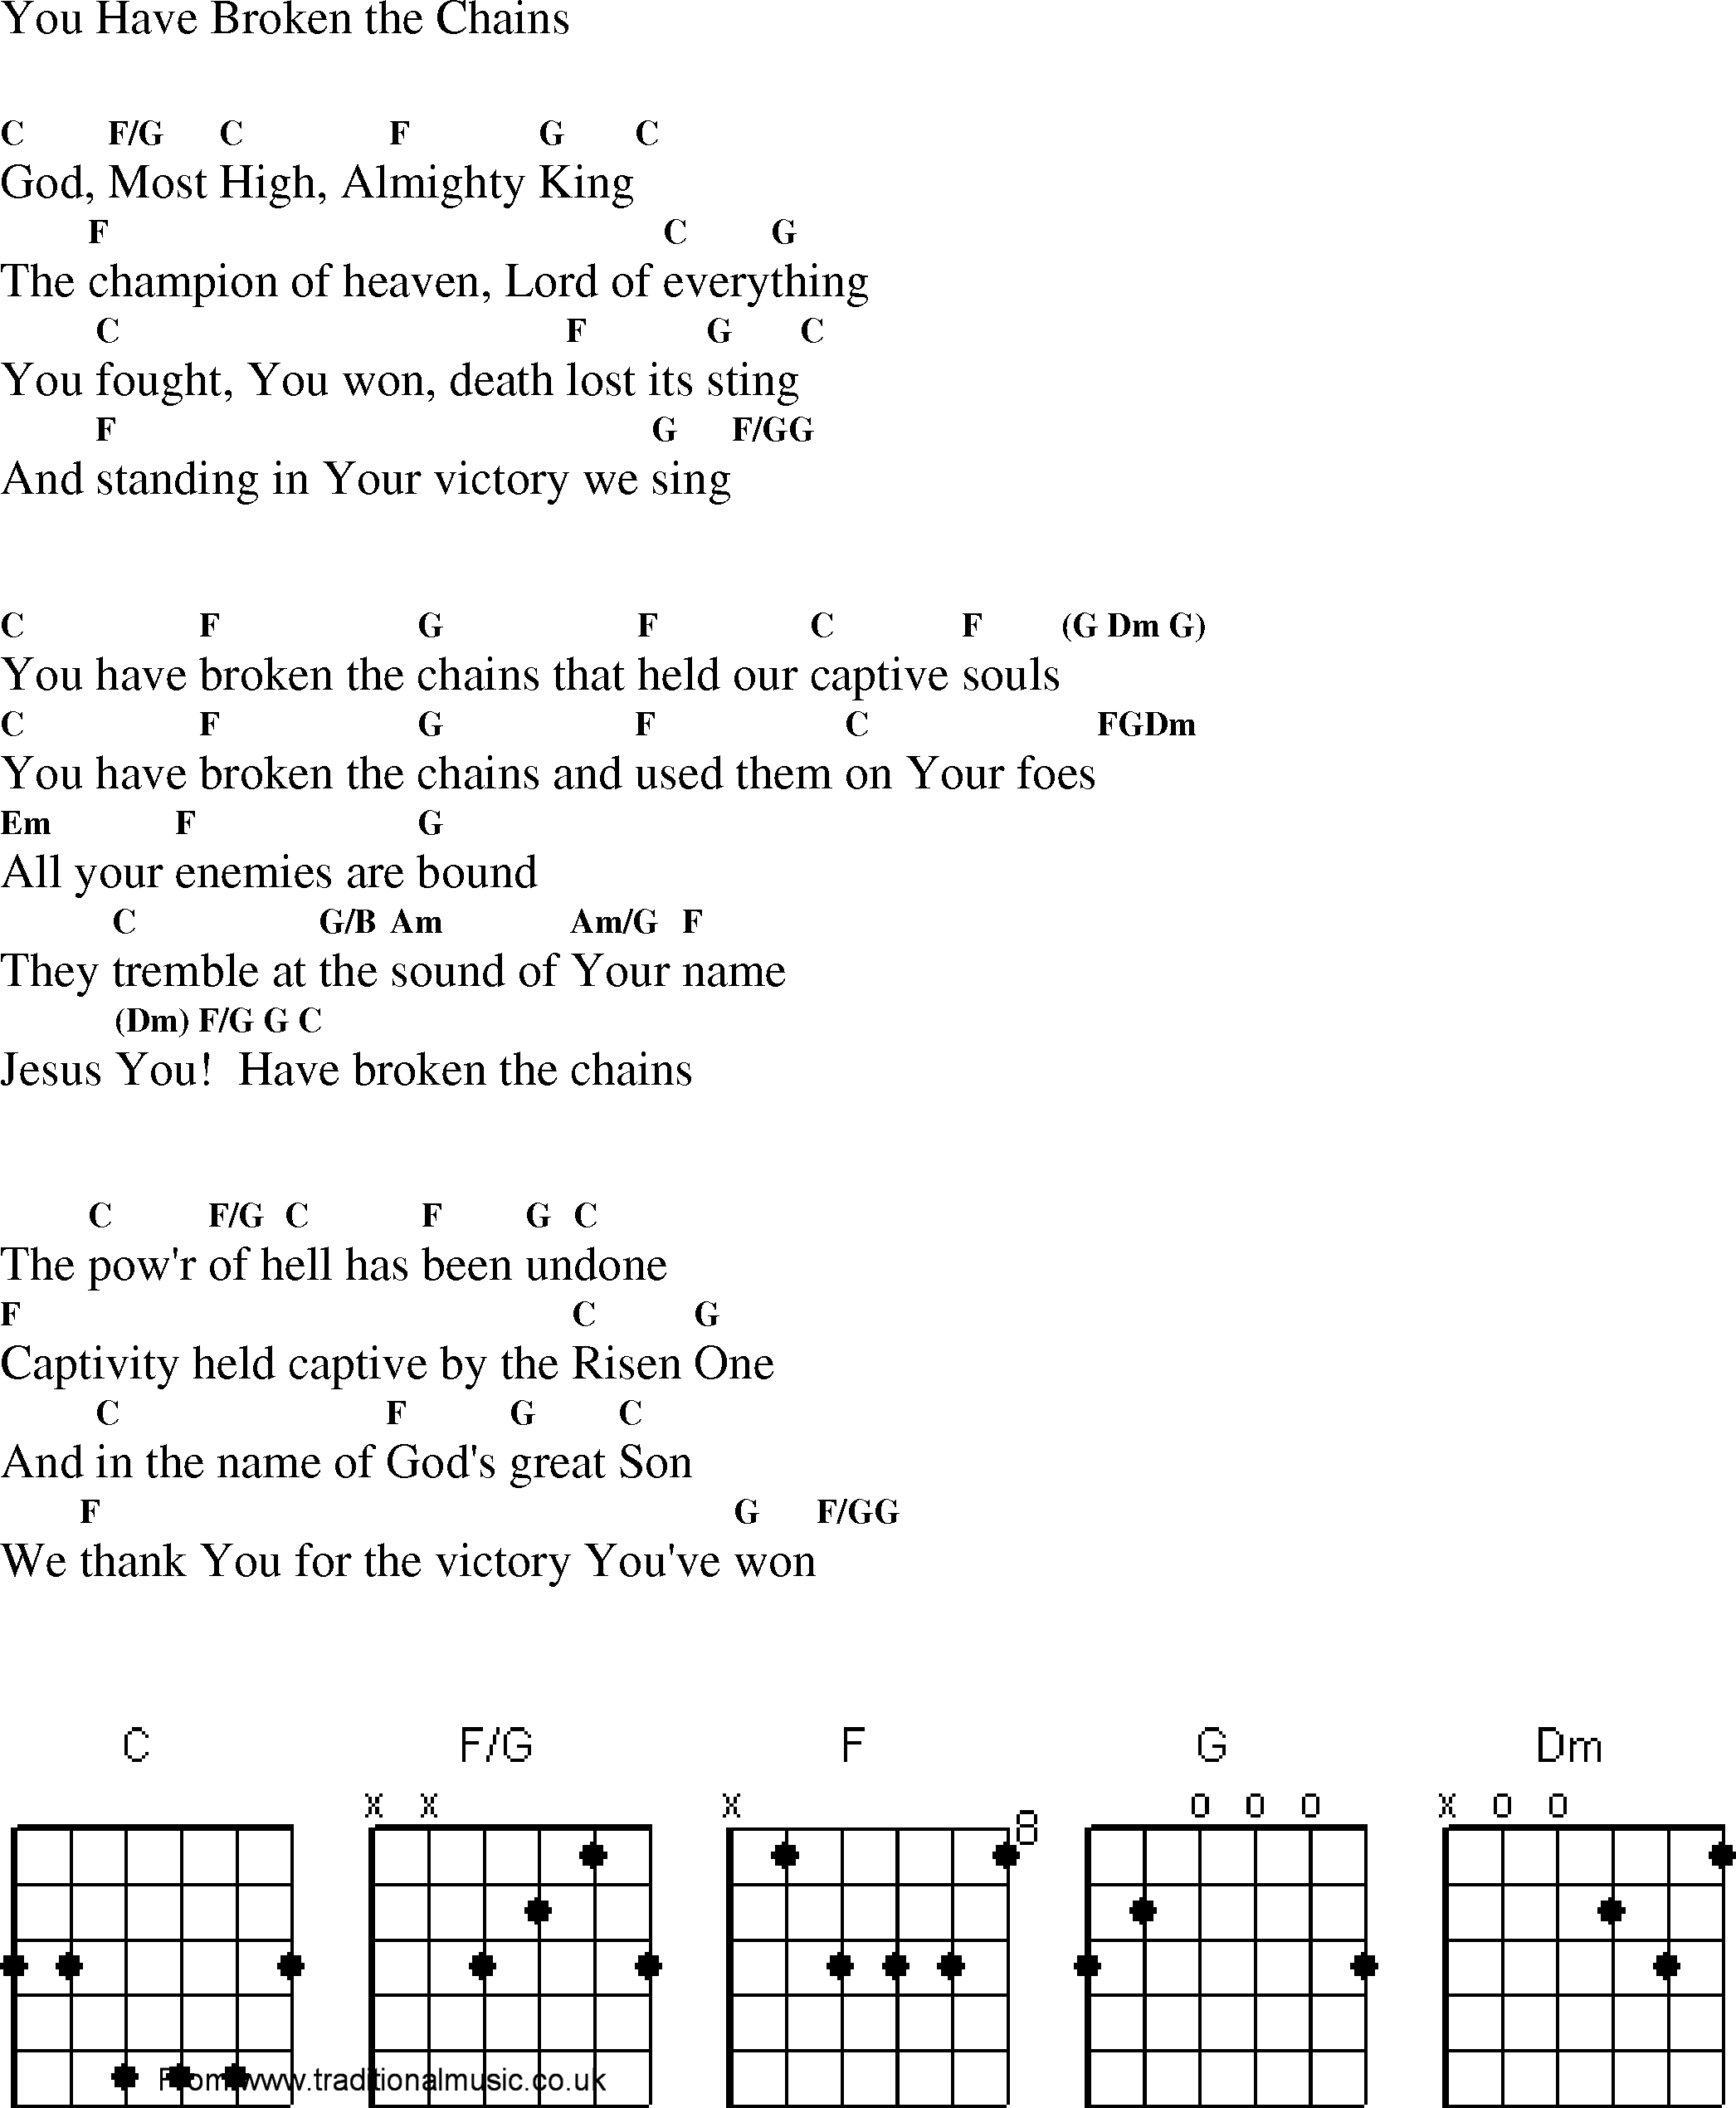 Gospel Song: you_have_broken_the_chains, lyrics and chords.